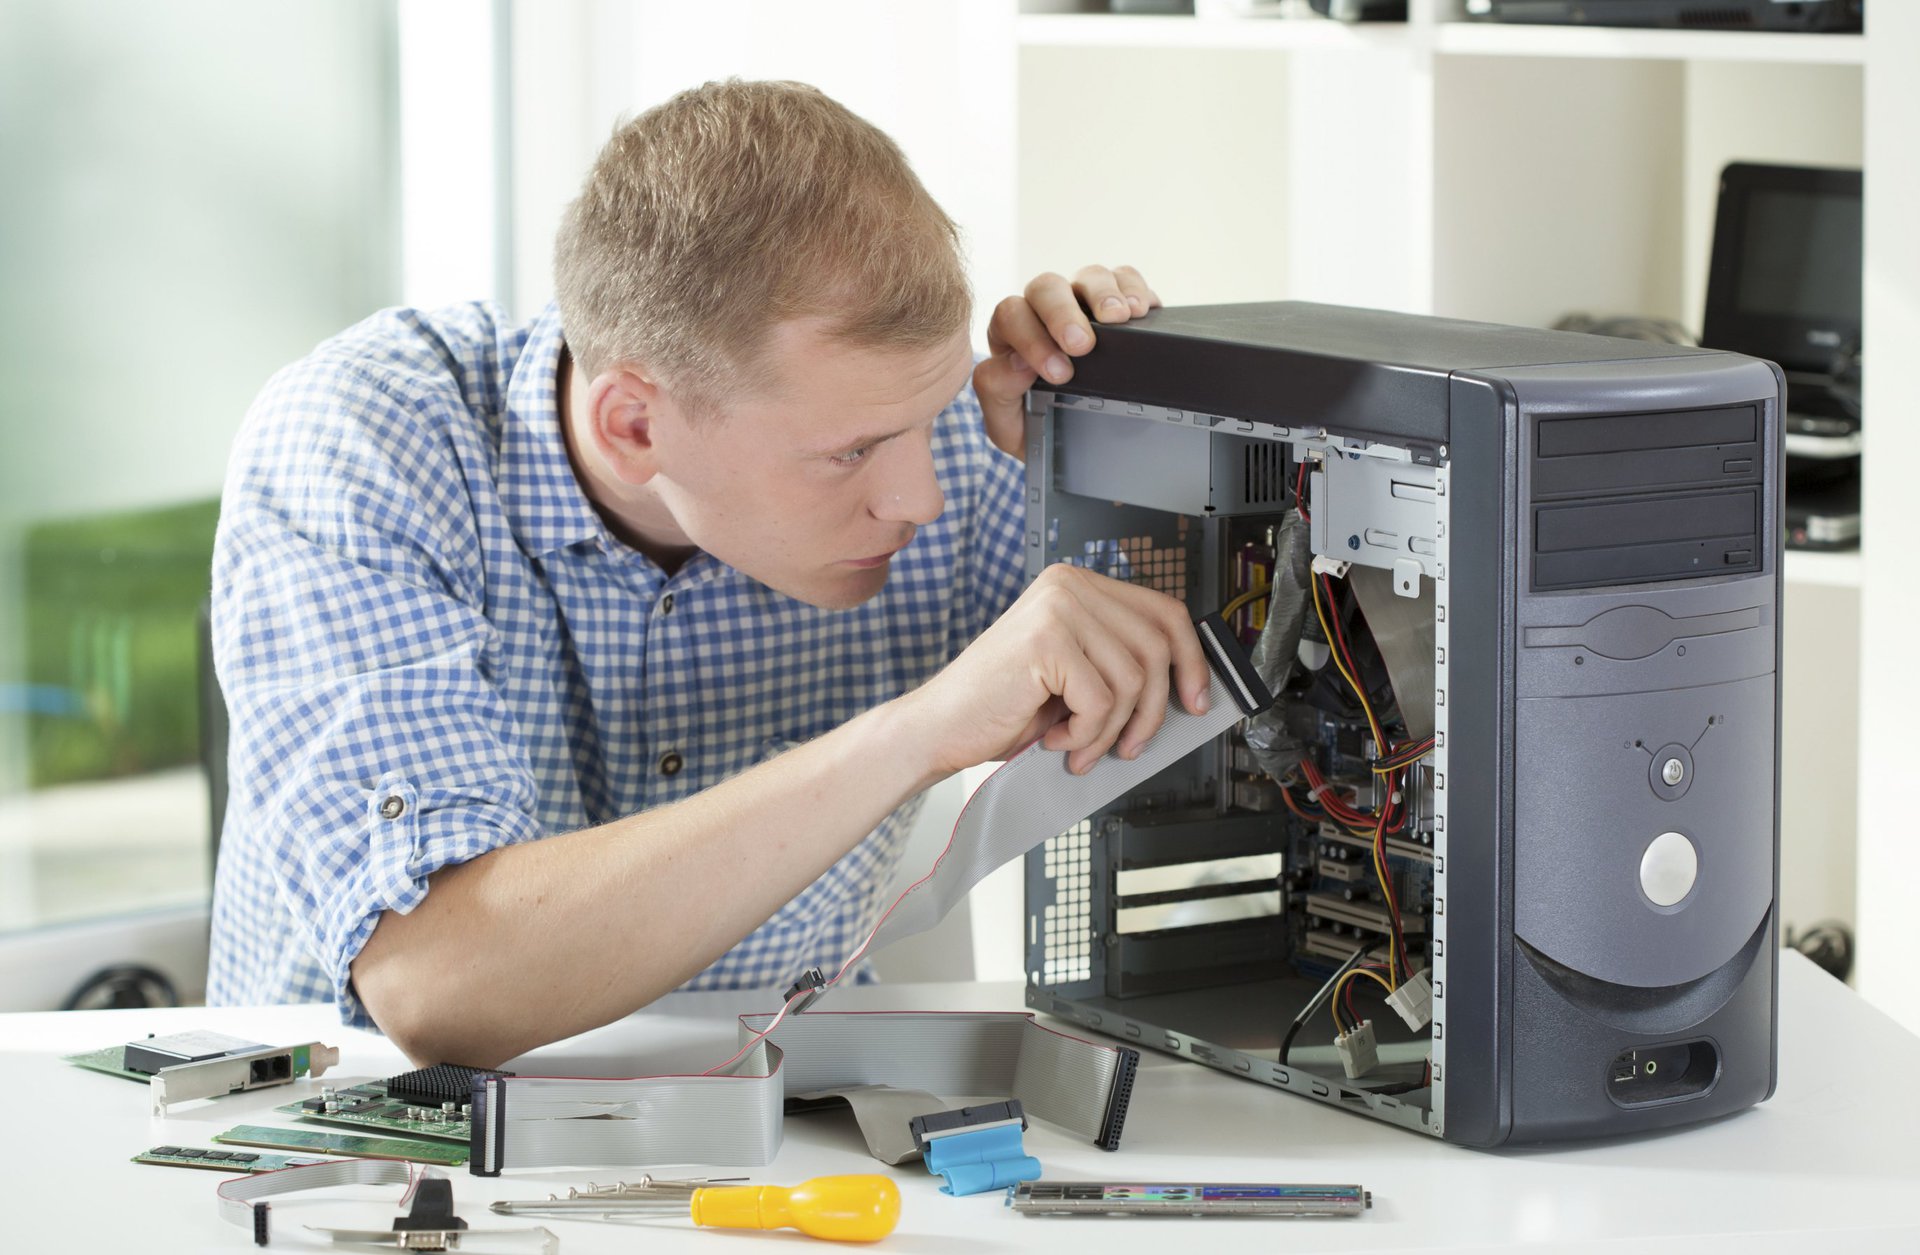 Pasadena Hills FL On Site PC & Printer Repair, Networks, Voice & Data Cabling Services